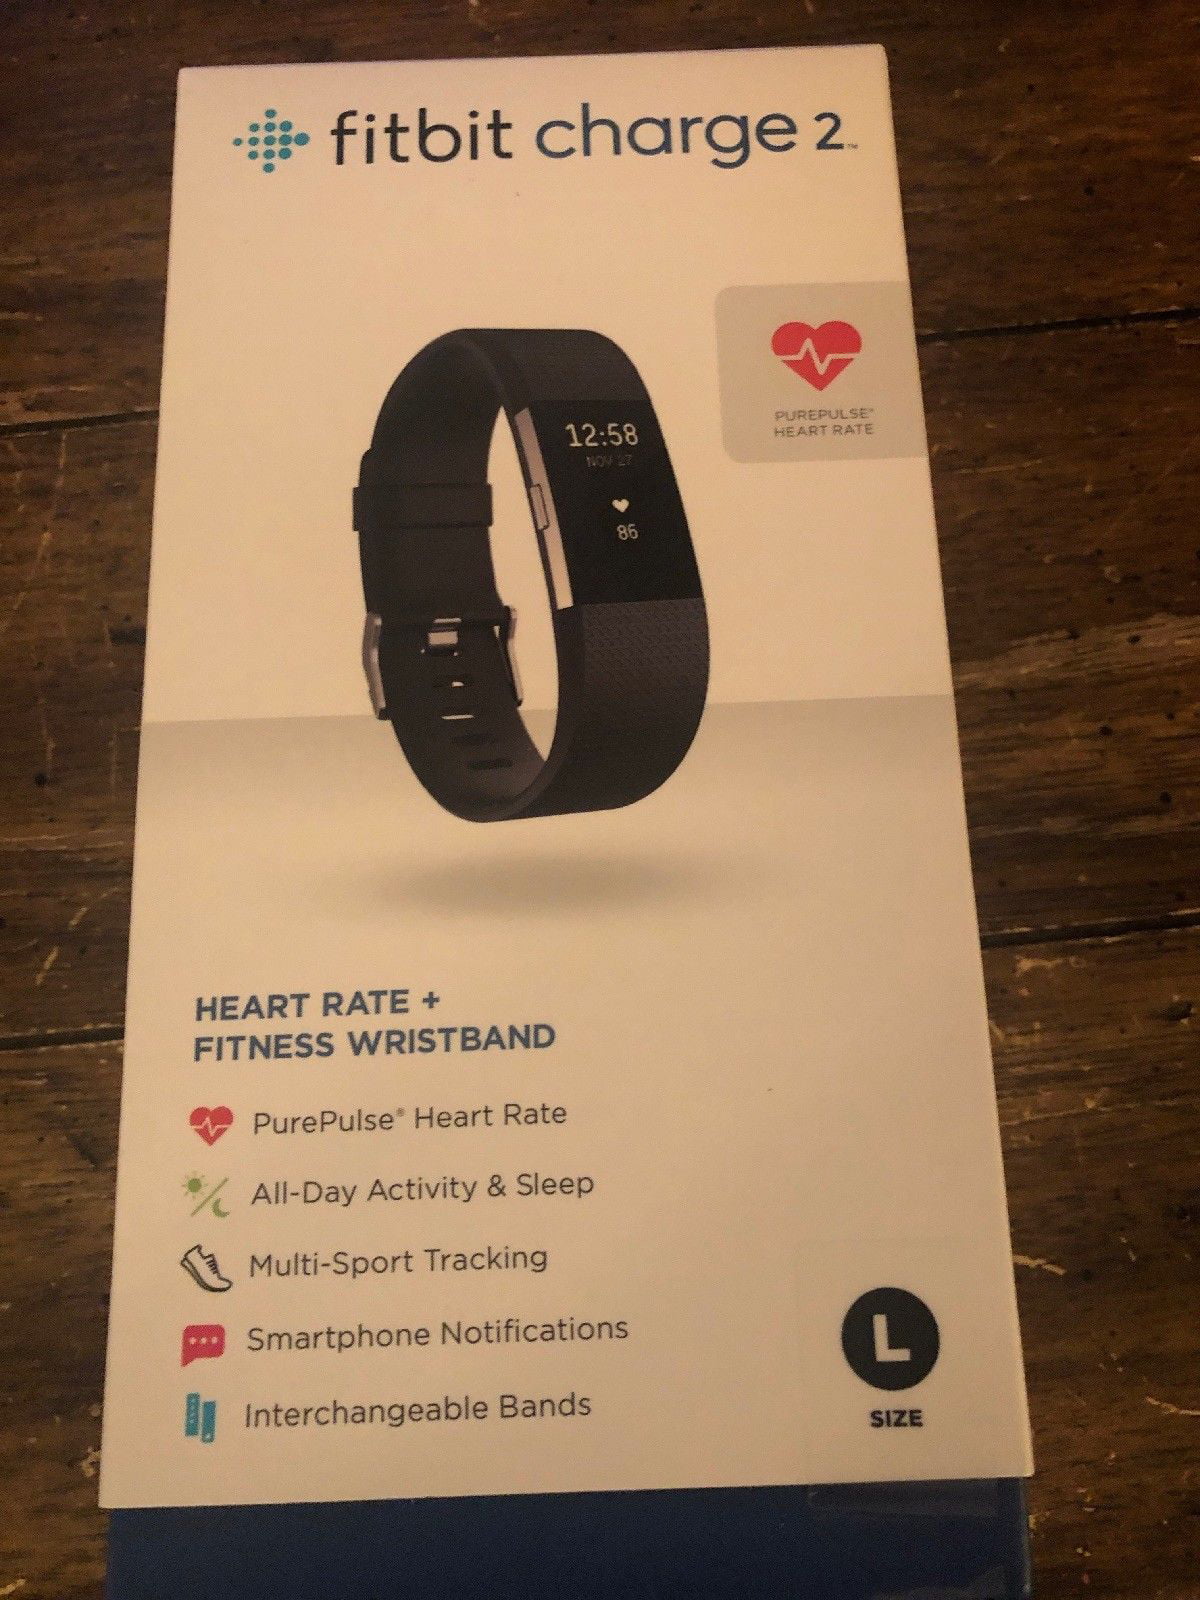 Fitbit Fb407sbkl Charge 2 Heart Rate Fitness Wristband Black Large Bundle for sale online 